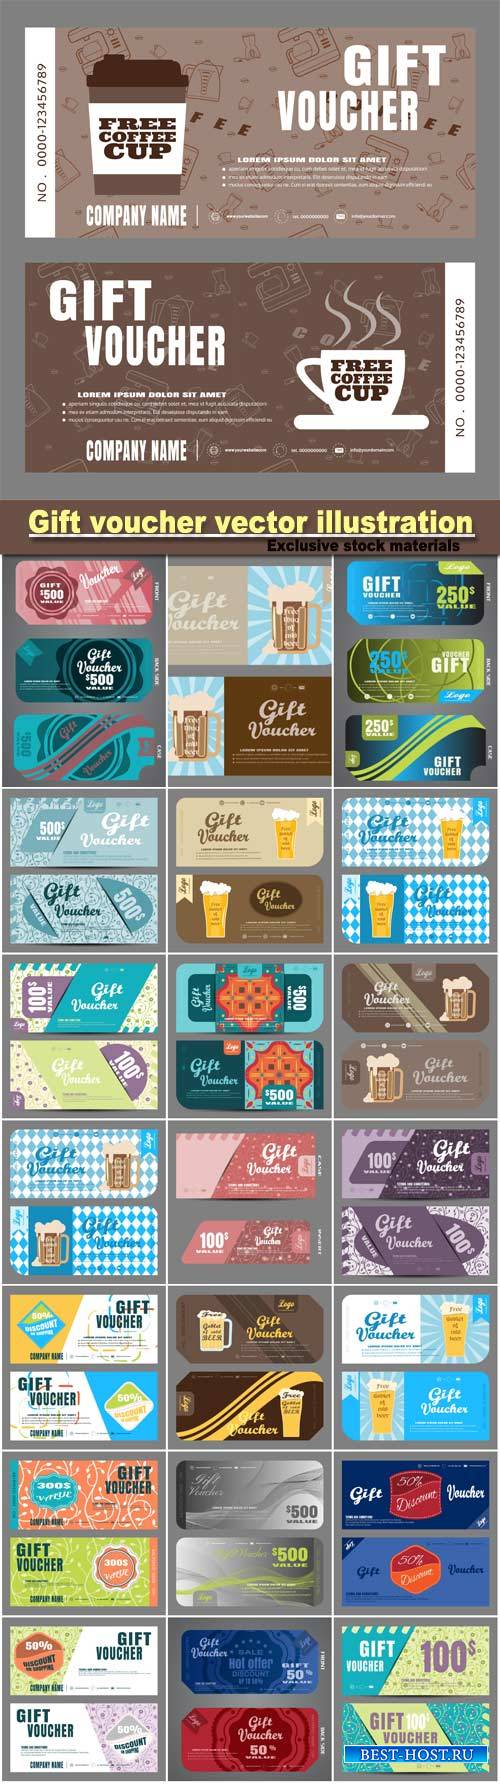 Gift voucher vector illustration to increase the sales